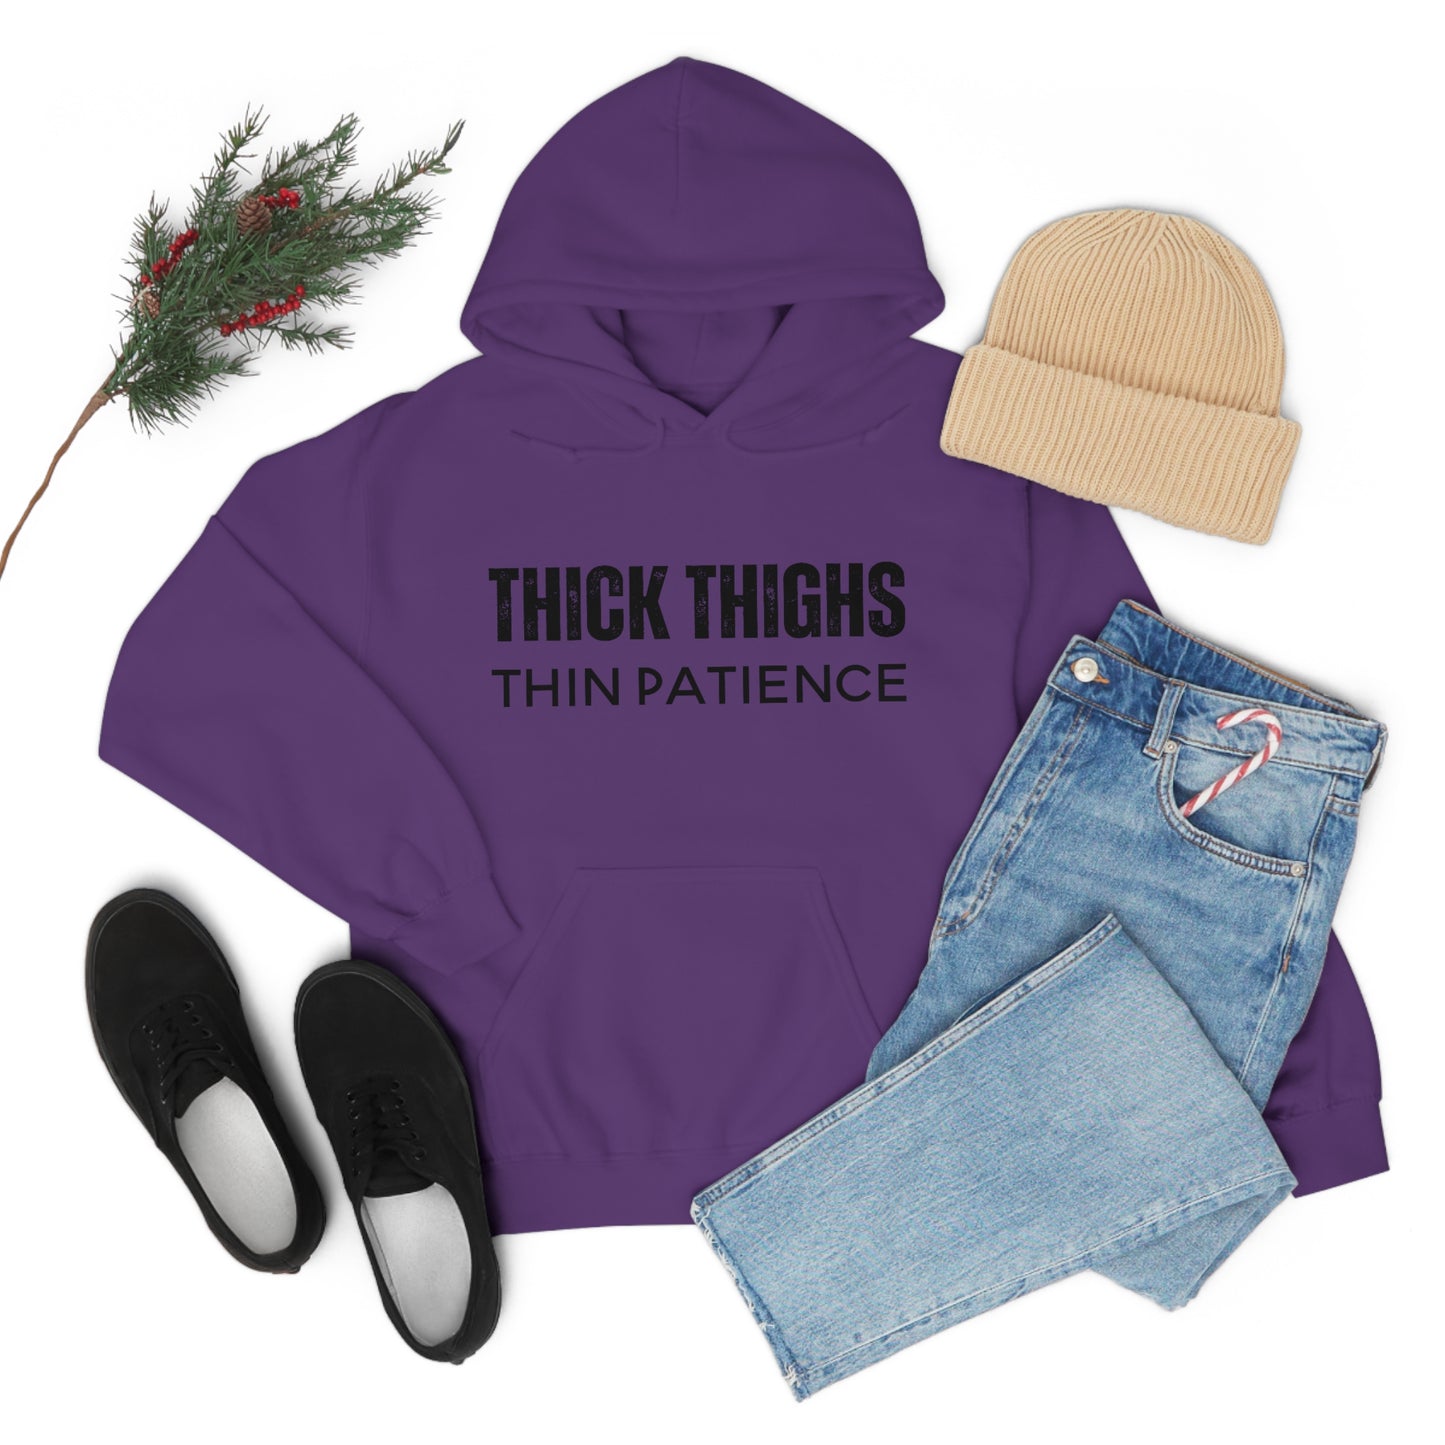 “Thick Thighs Thin Patience” Hoodie